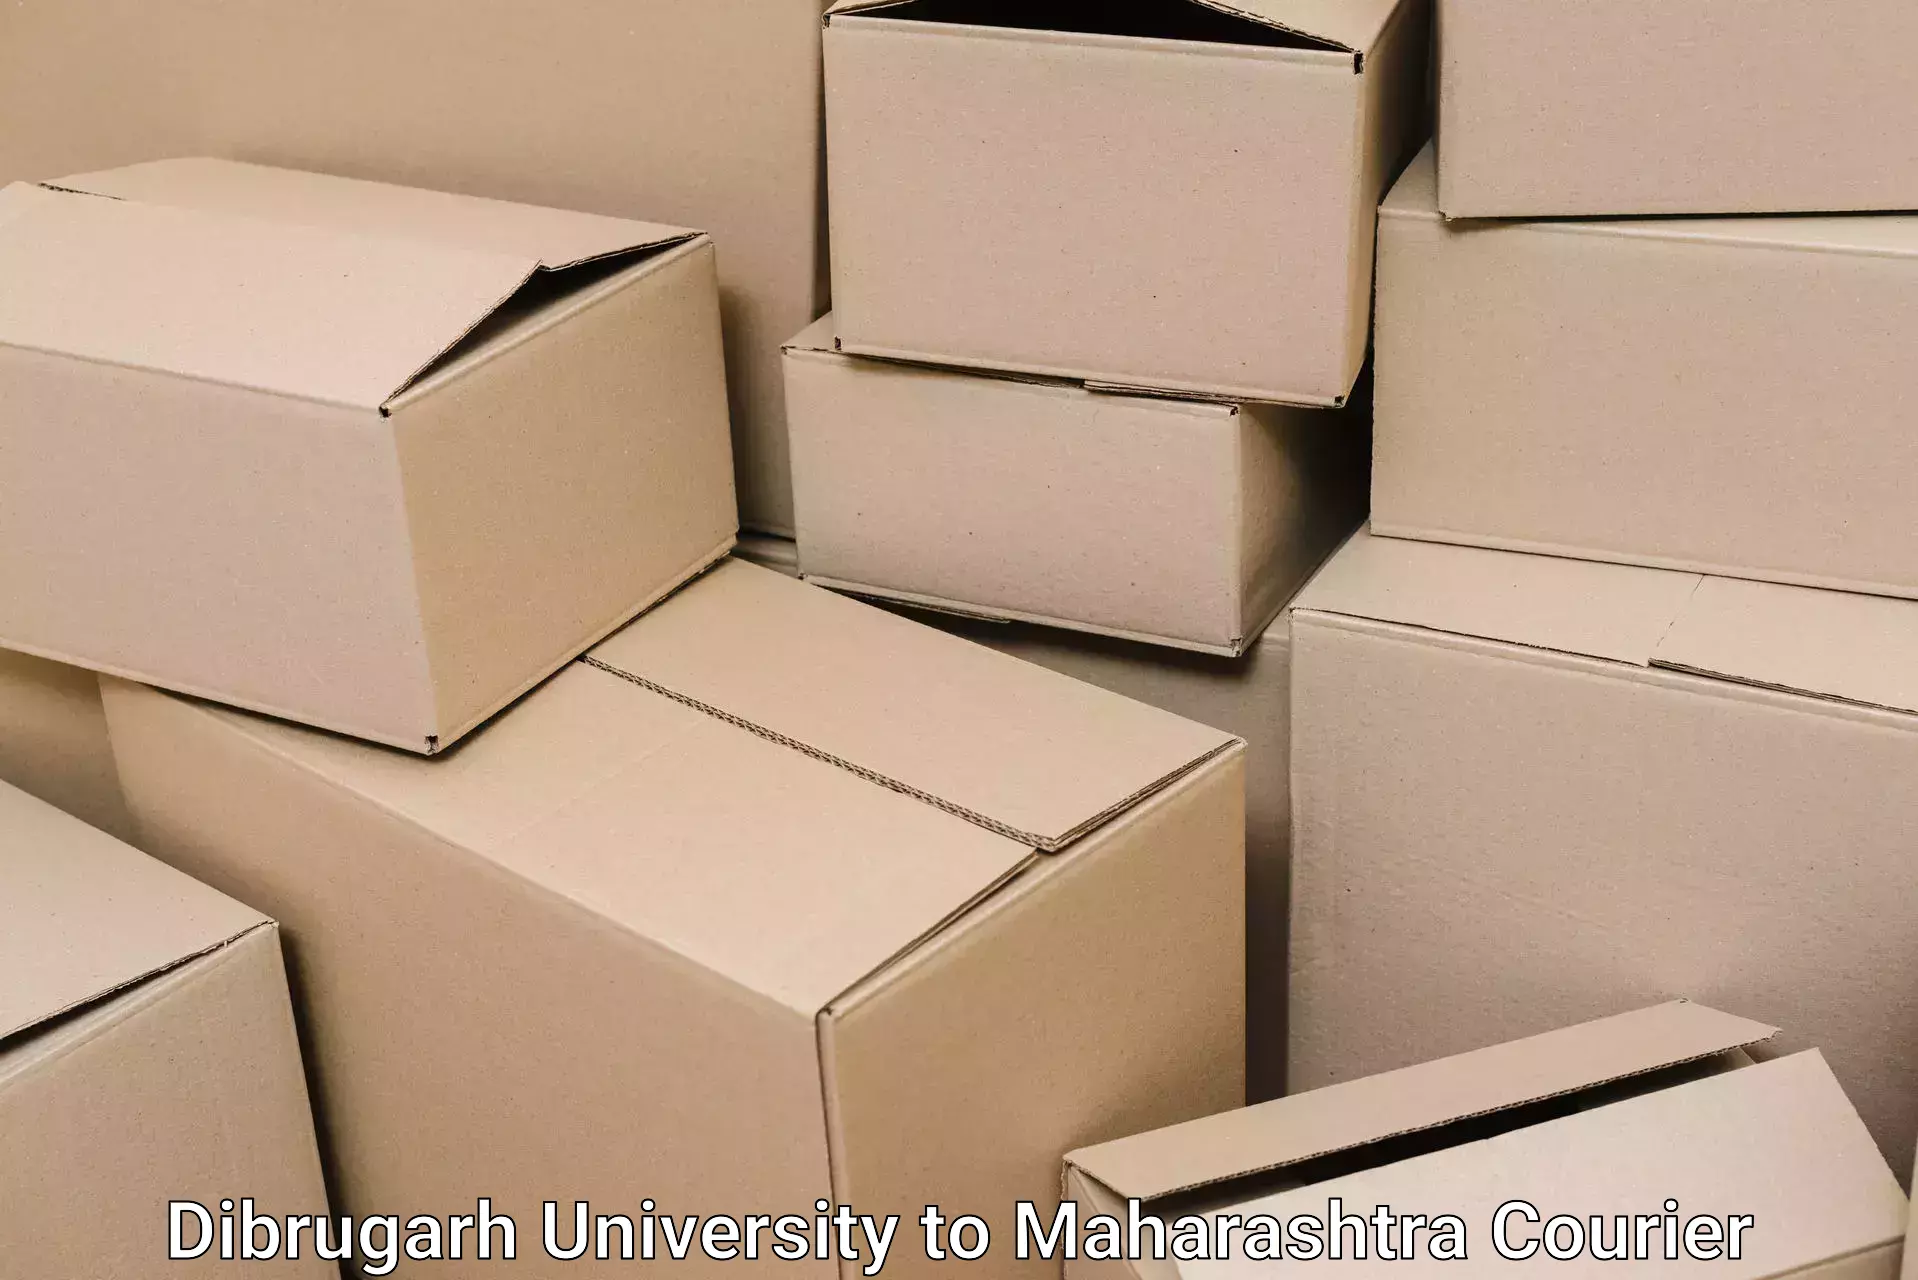 Moving and storage services Dibrugarh University to Ahmednagar